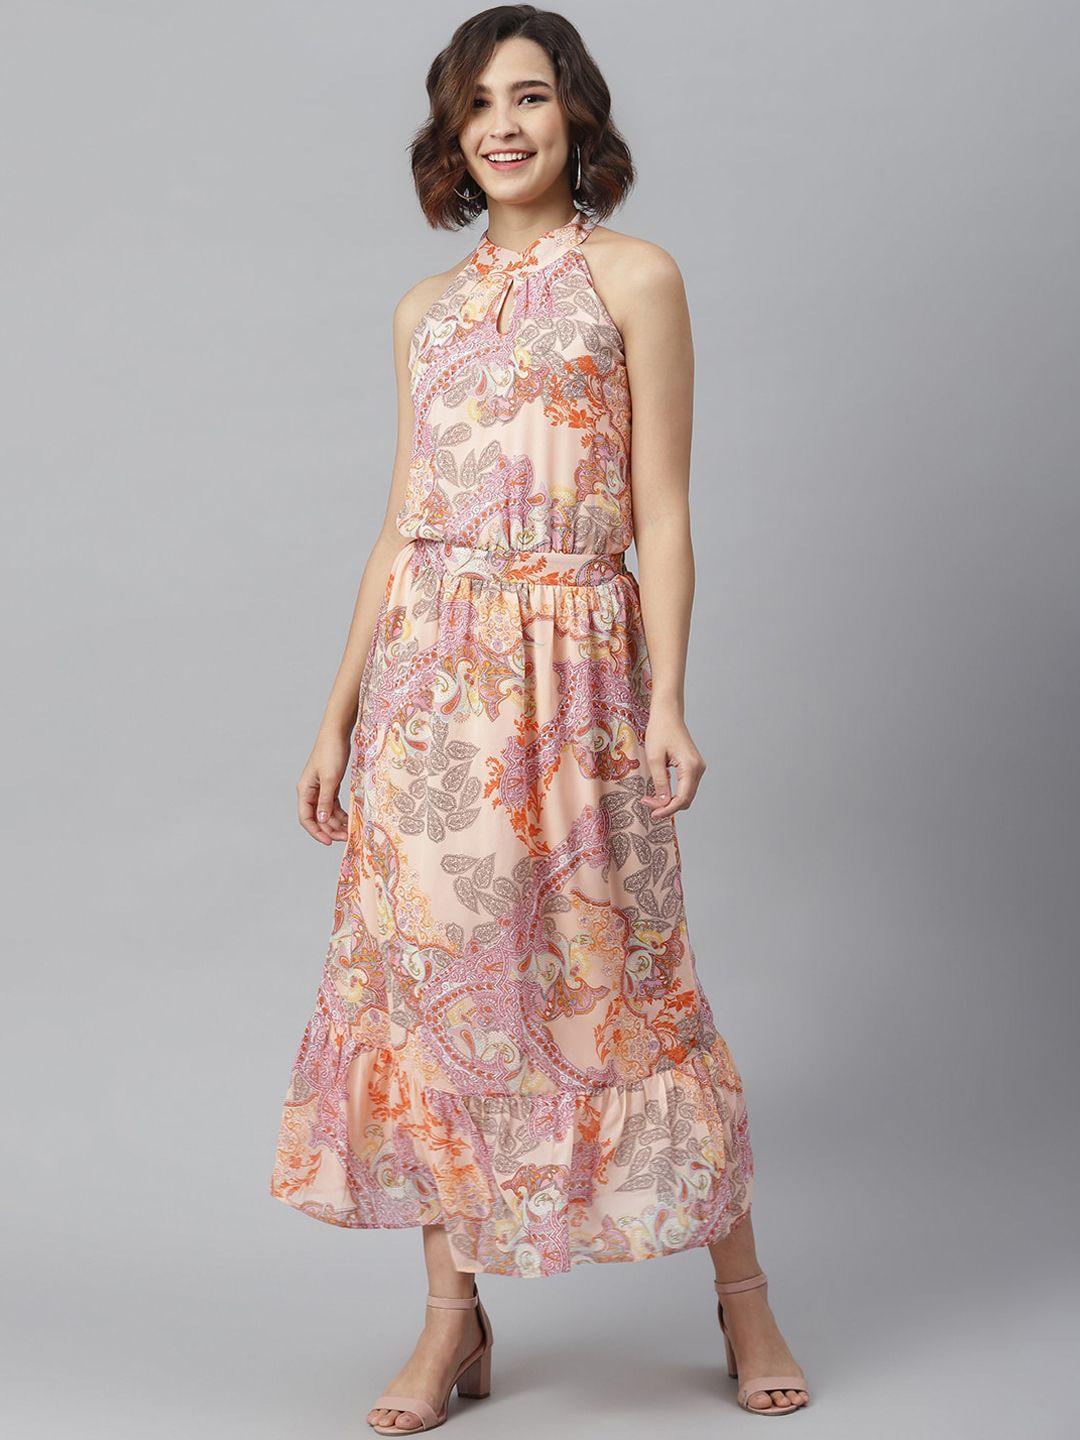 stylestone women peach-coloured printed fit and flare dress